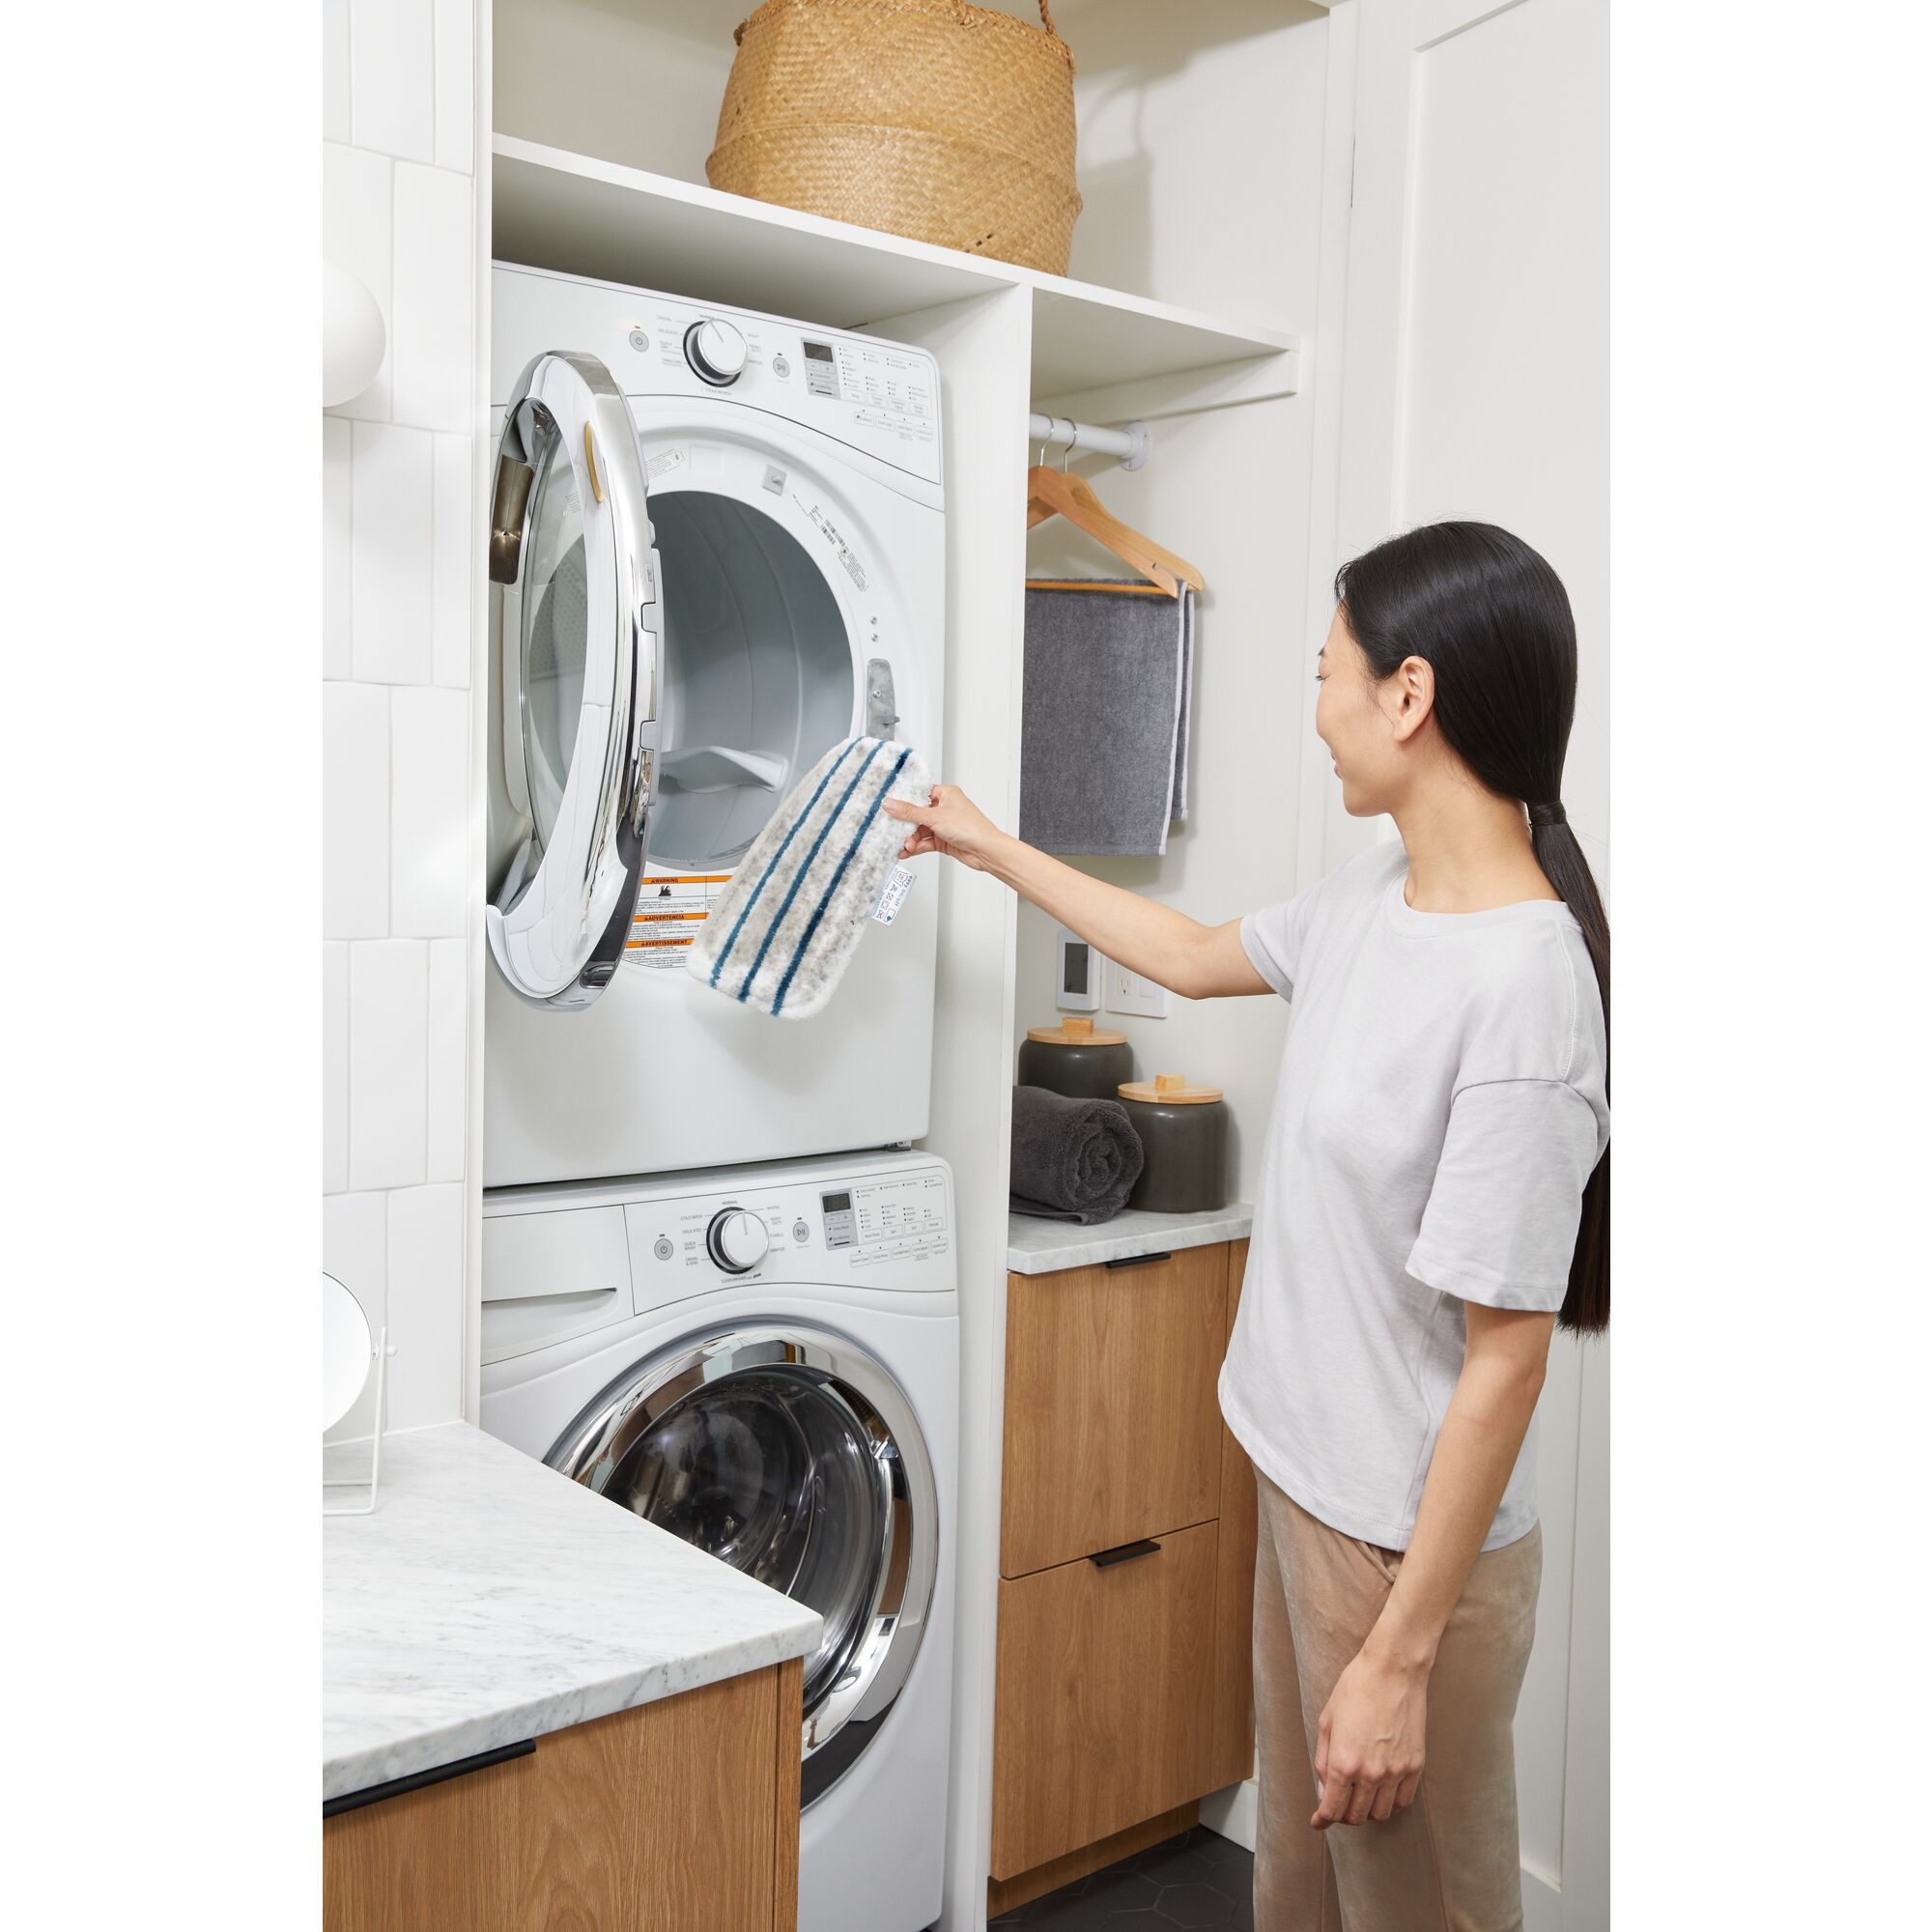 Woman tossing the removable steam mop cleaning pad into a washing machine